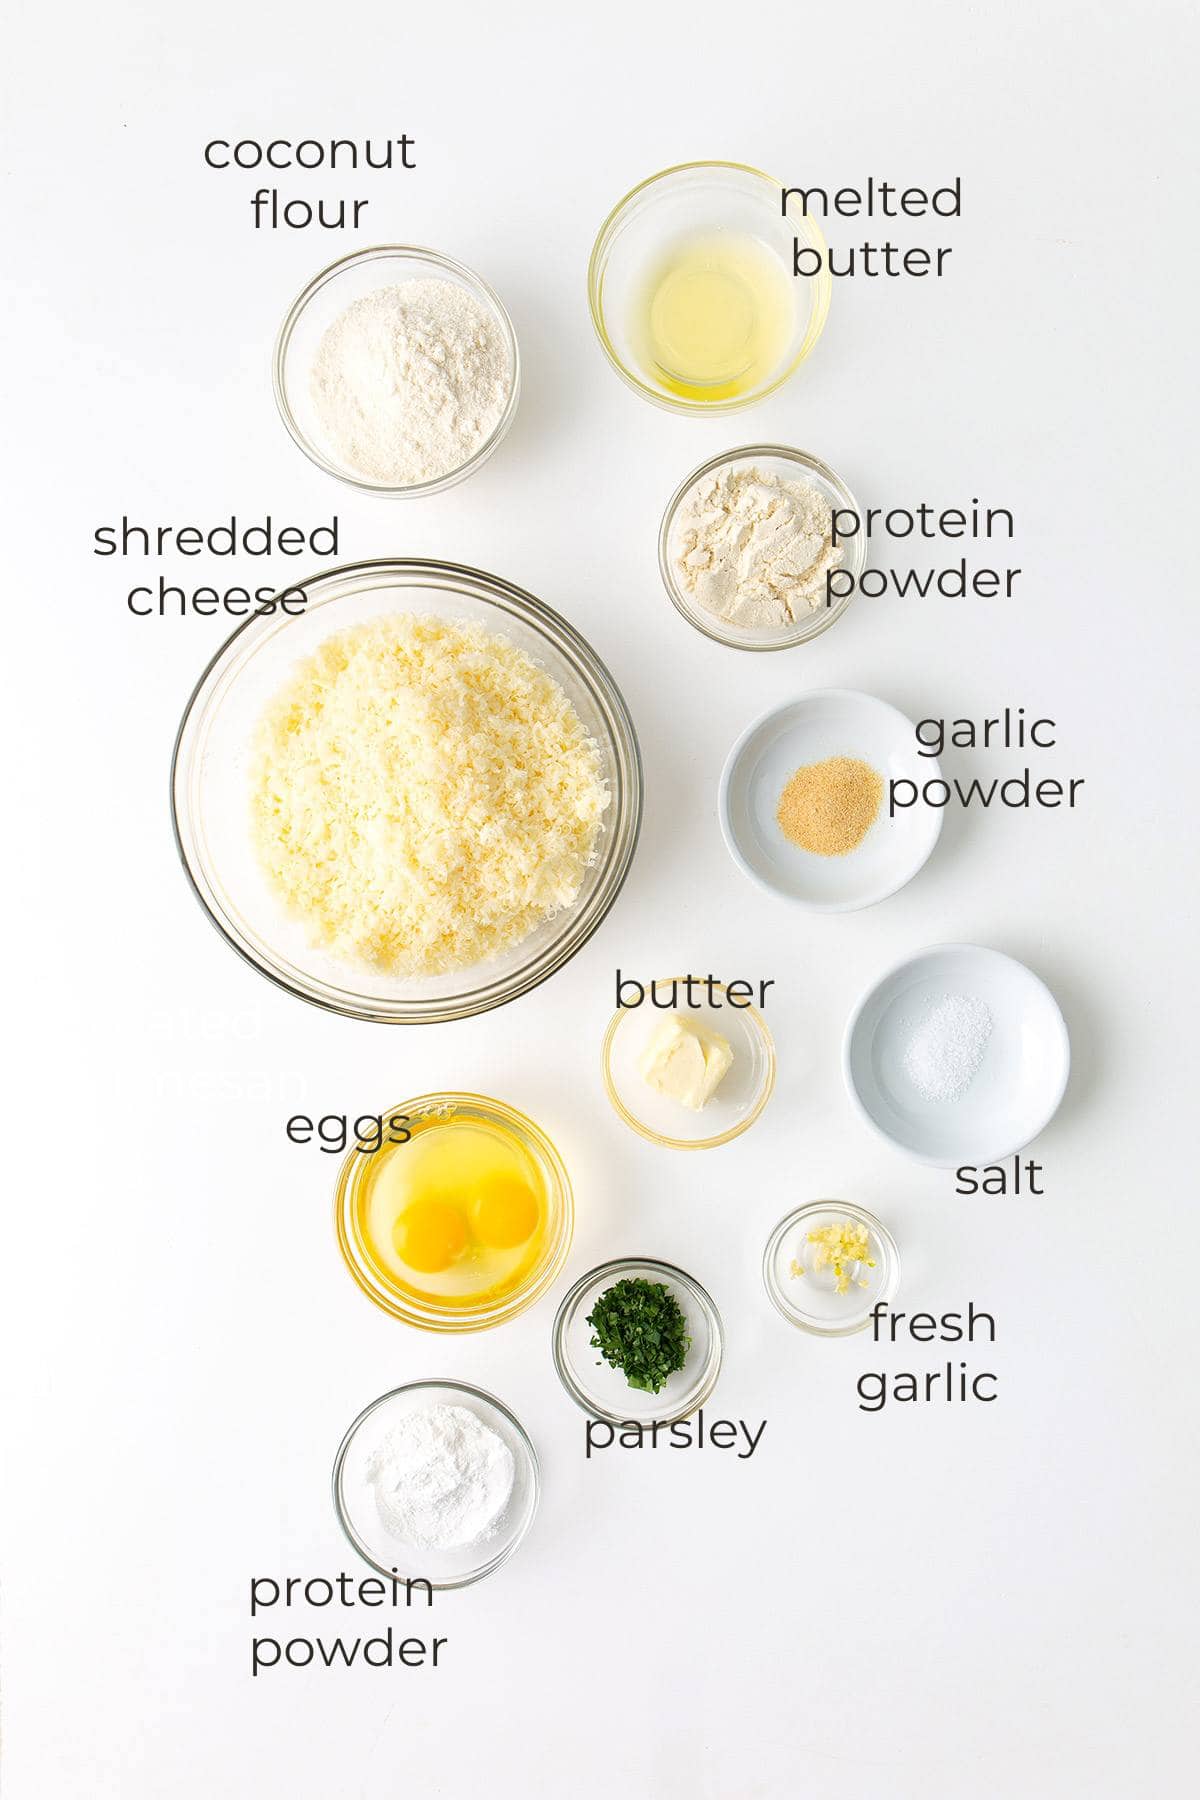 Top down image of ingredients needed for keto dinner rolls.